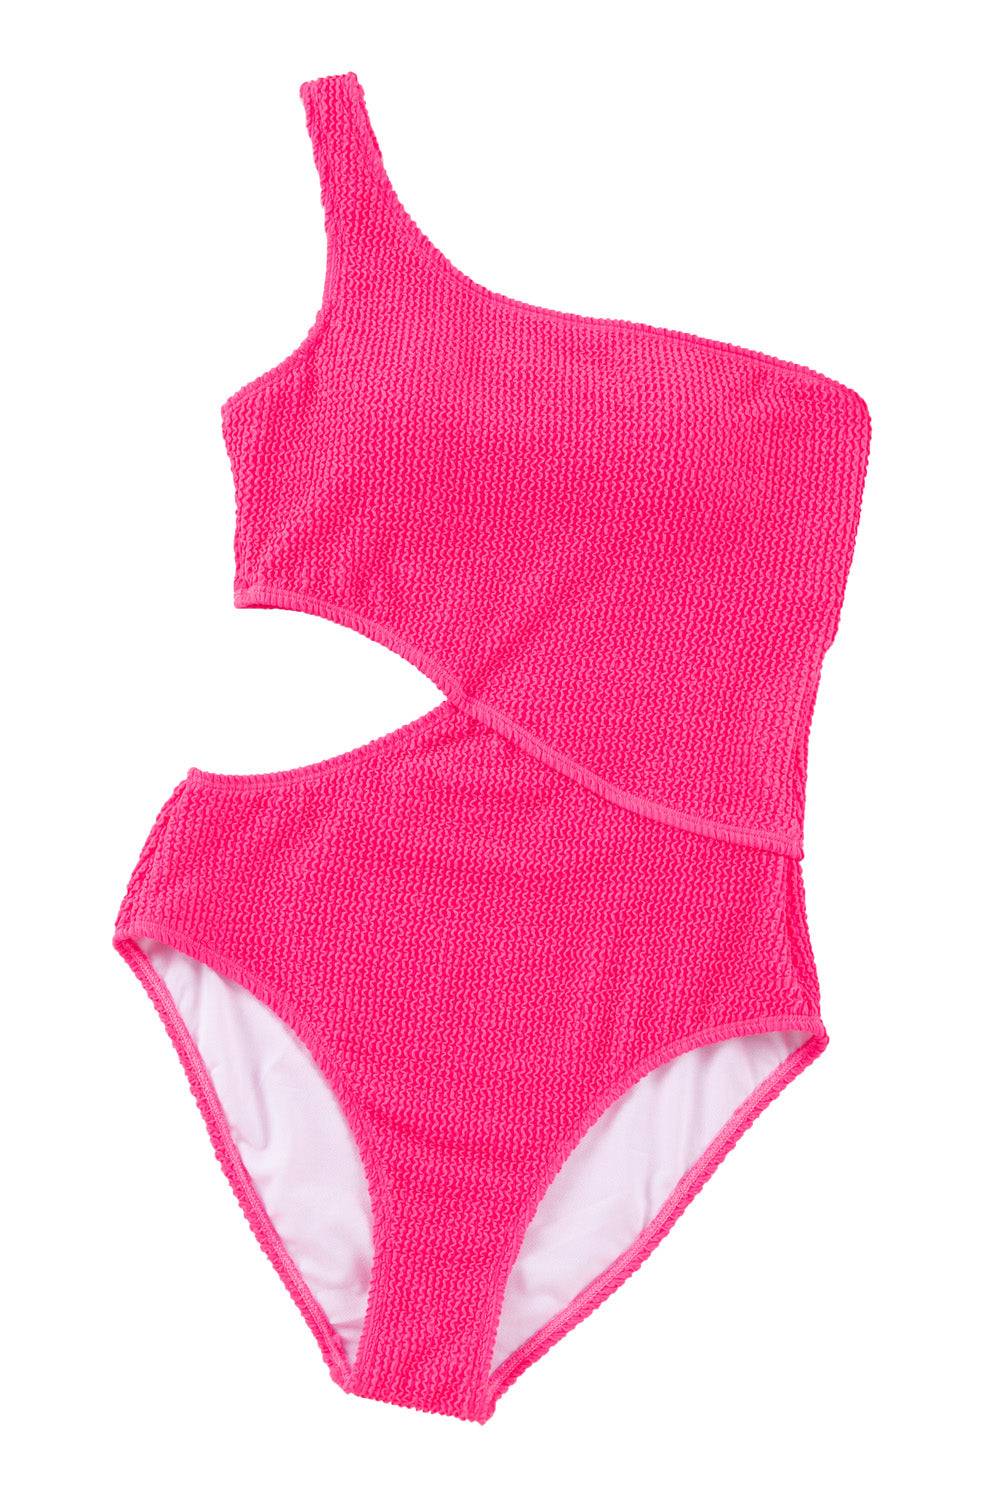 a pink one piece swimsuit on a white background